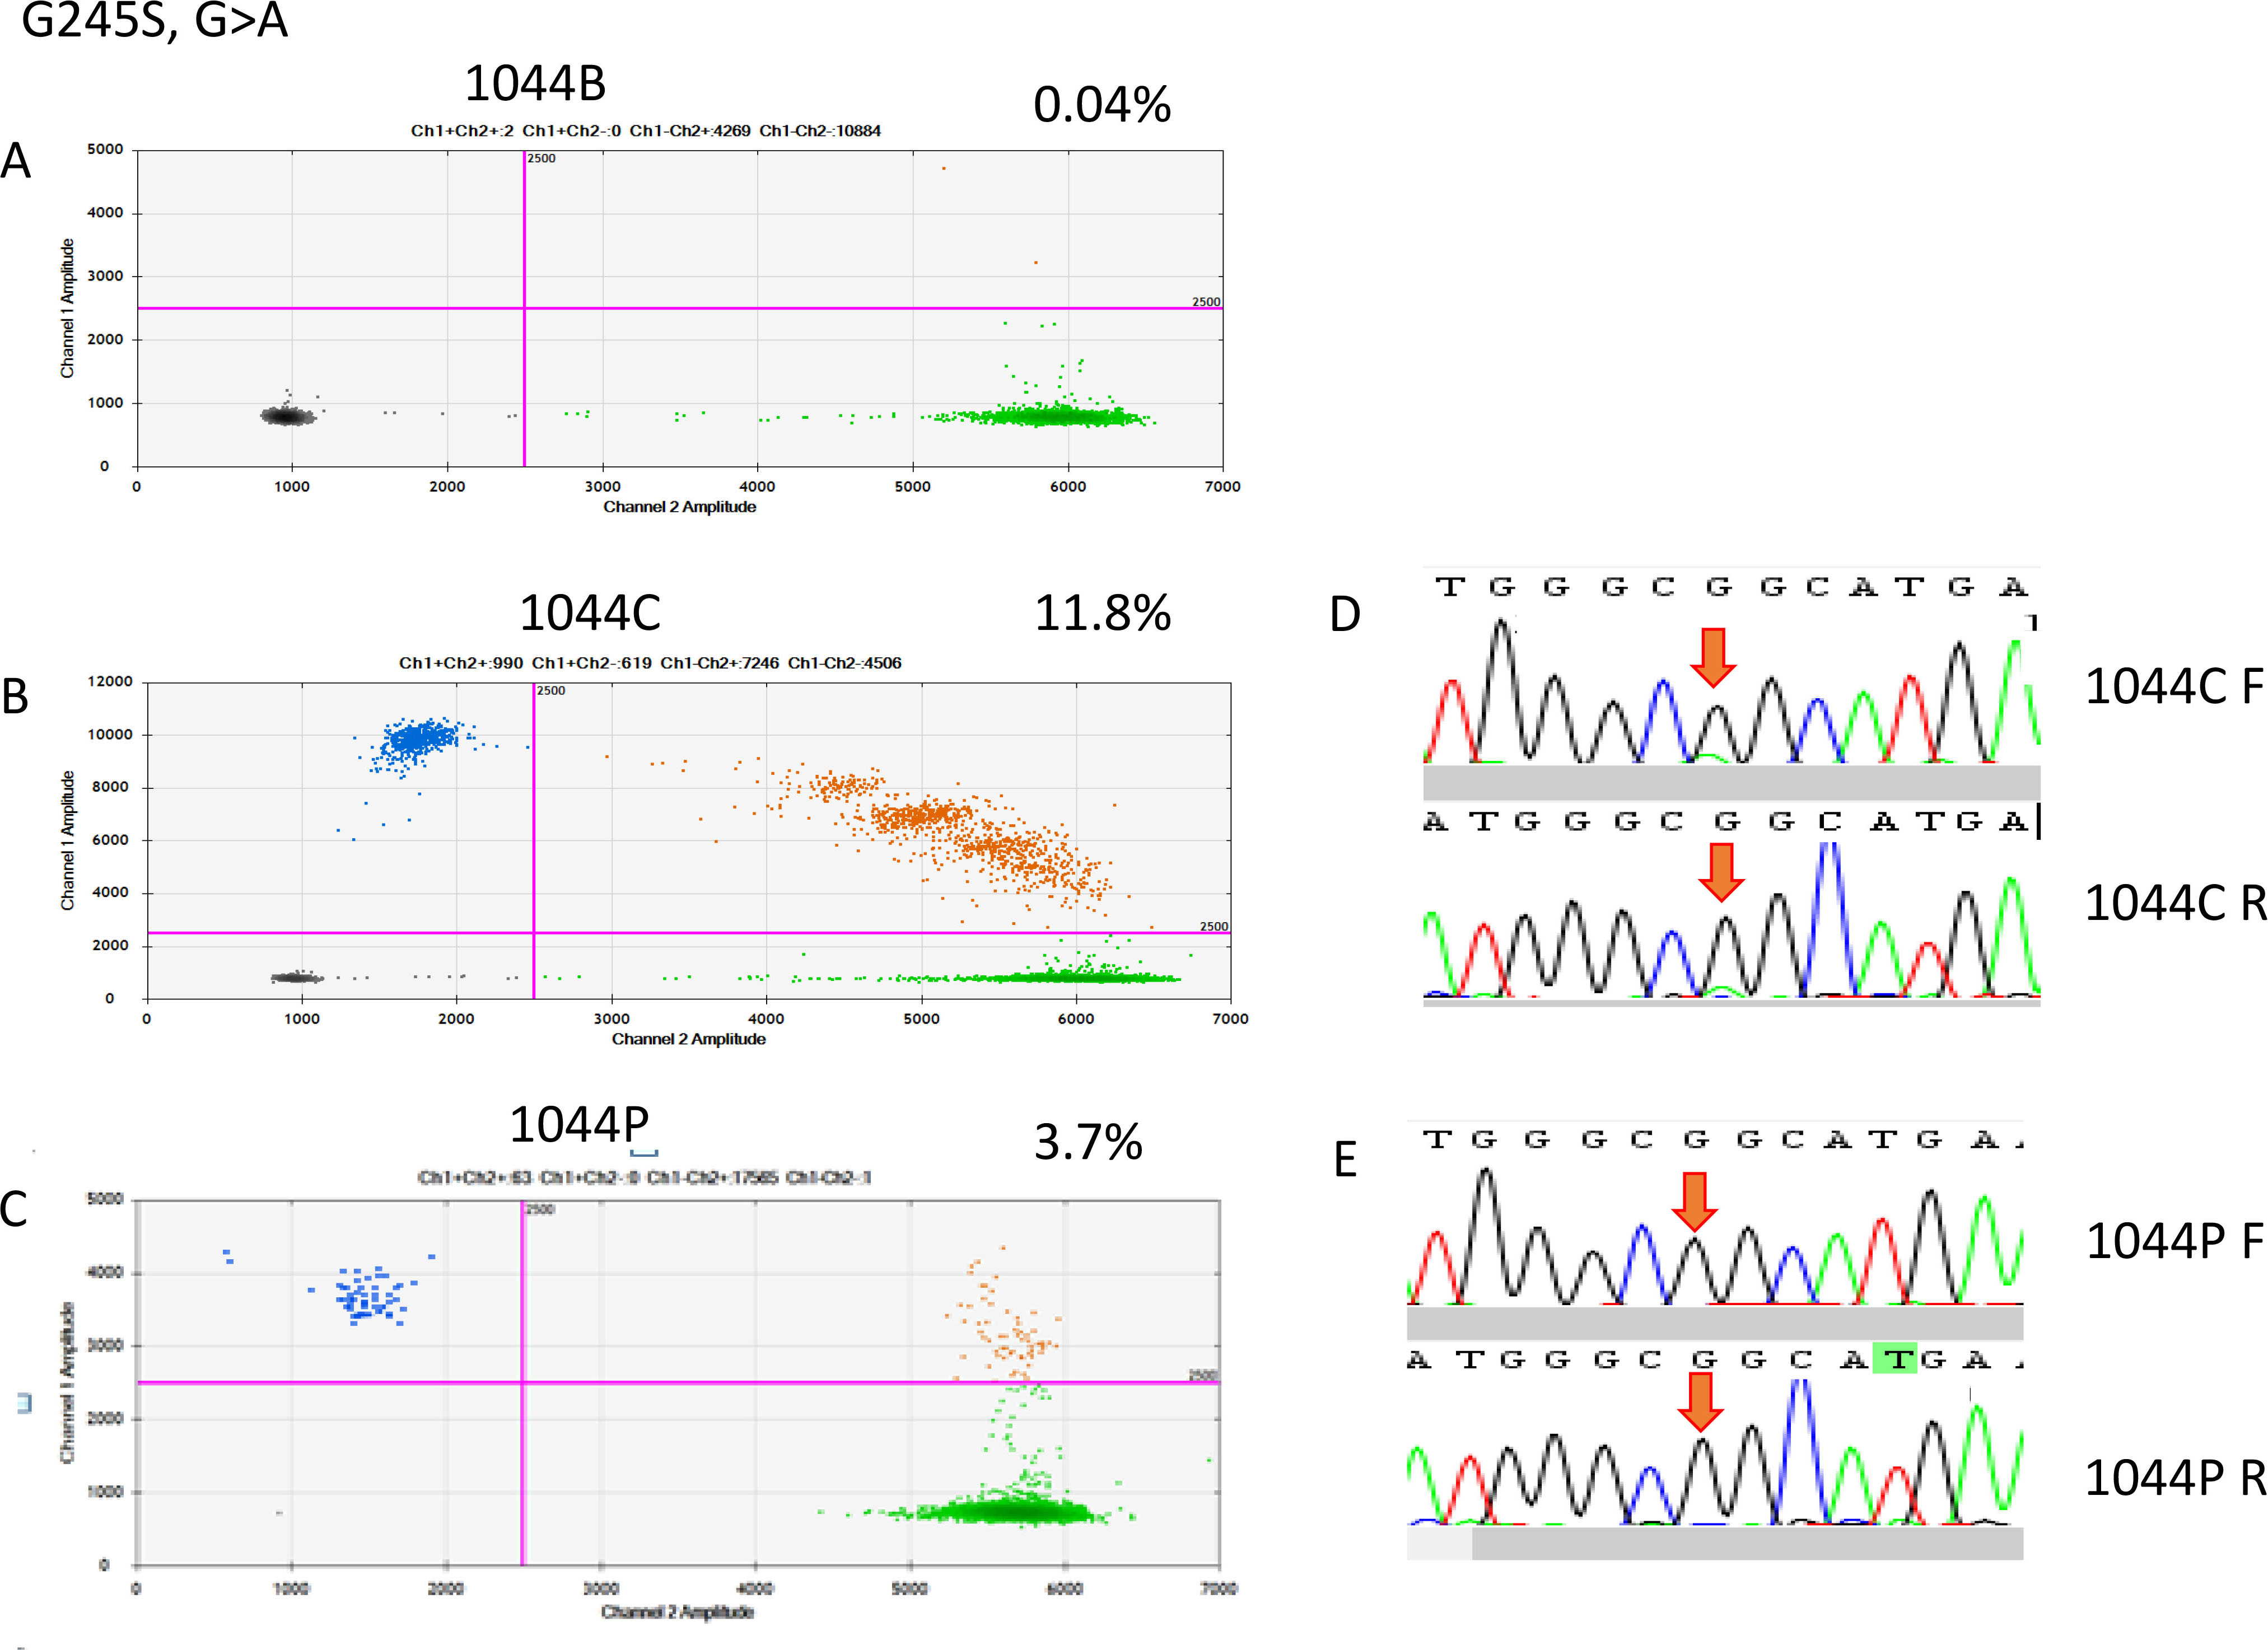 ddRT-PCR results of patient 1044. The two-dimensional plots show the amount of MT-G245S droplets in the analysis. (A) Blood sample, (B) FFPE sample, and (C) cfDNA sample; (D) Sanger sequencing indicated a G-to-A point mutation in the FFPE sample, but it was not detectable in the cfDNA sample.